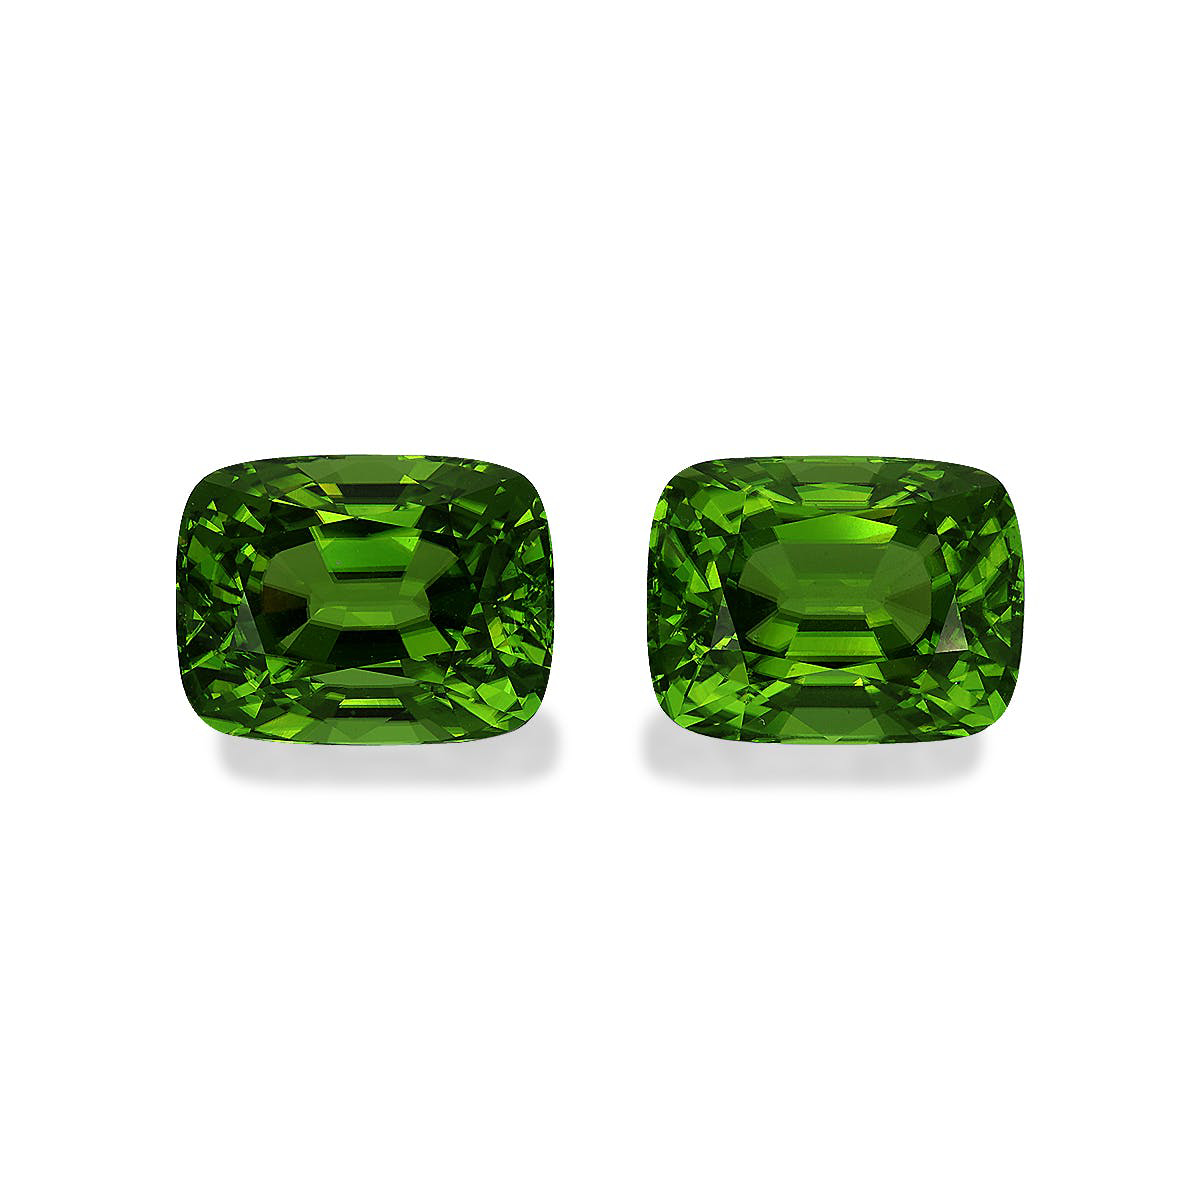 Picture of Vivid Green Peridot 40.30ct - Pair (PD0250)